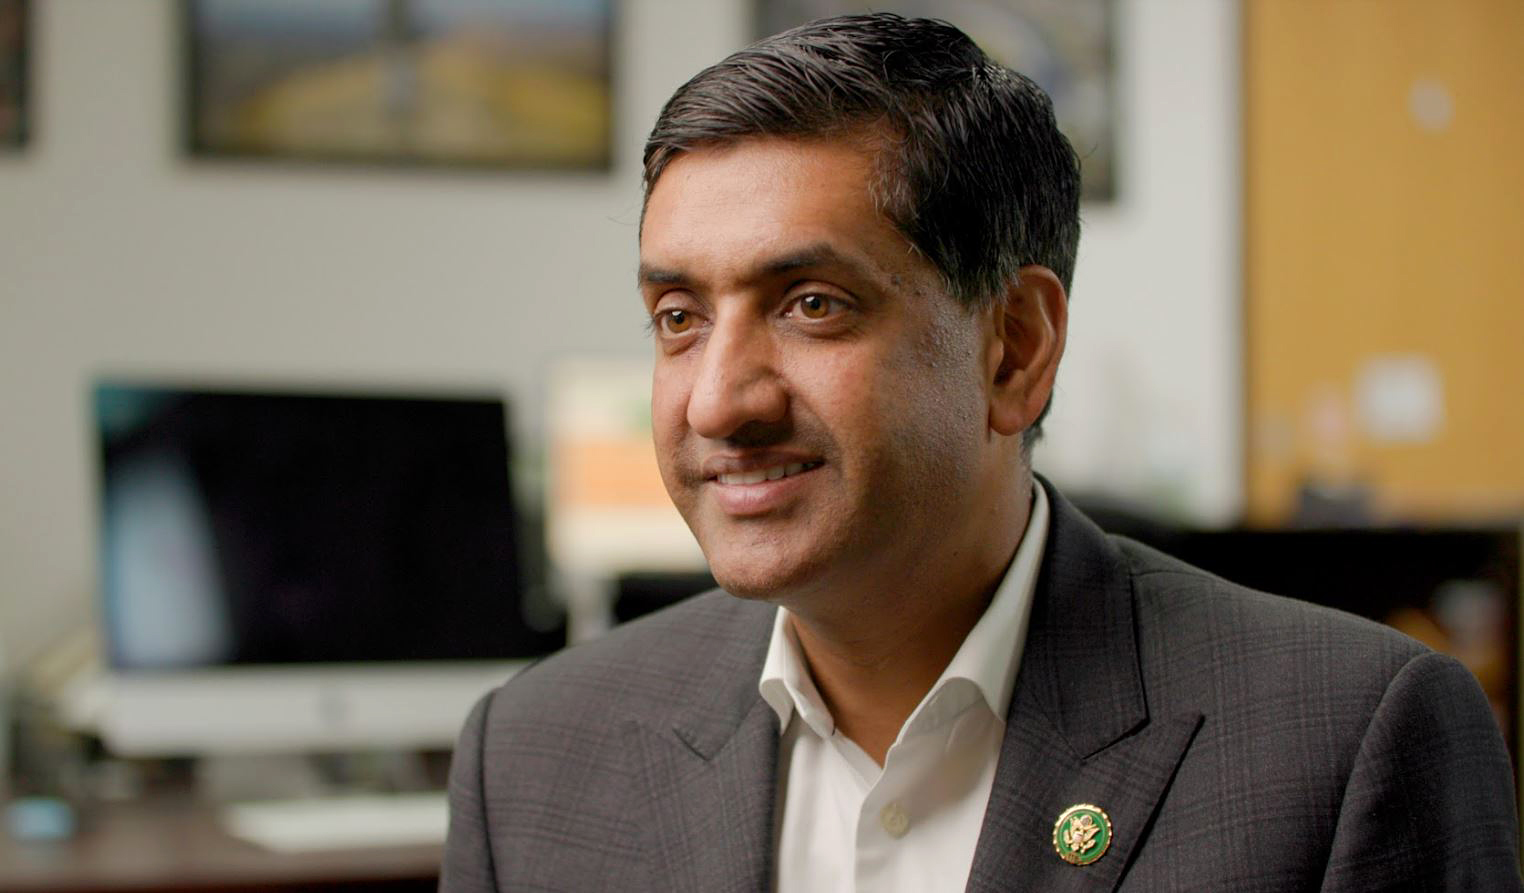 JUST GETTING STARTED? Gatez Plans CONGRESSIONAL TAKEOVER With Ro Khanna, Reform Bill: Rising